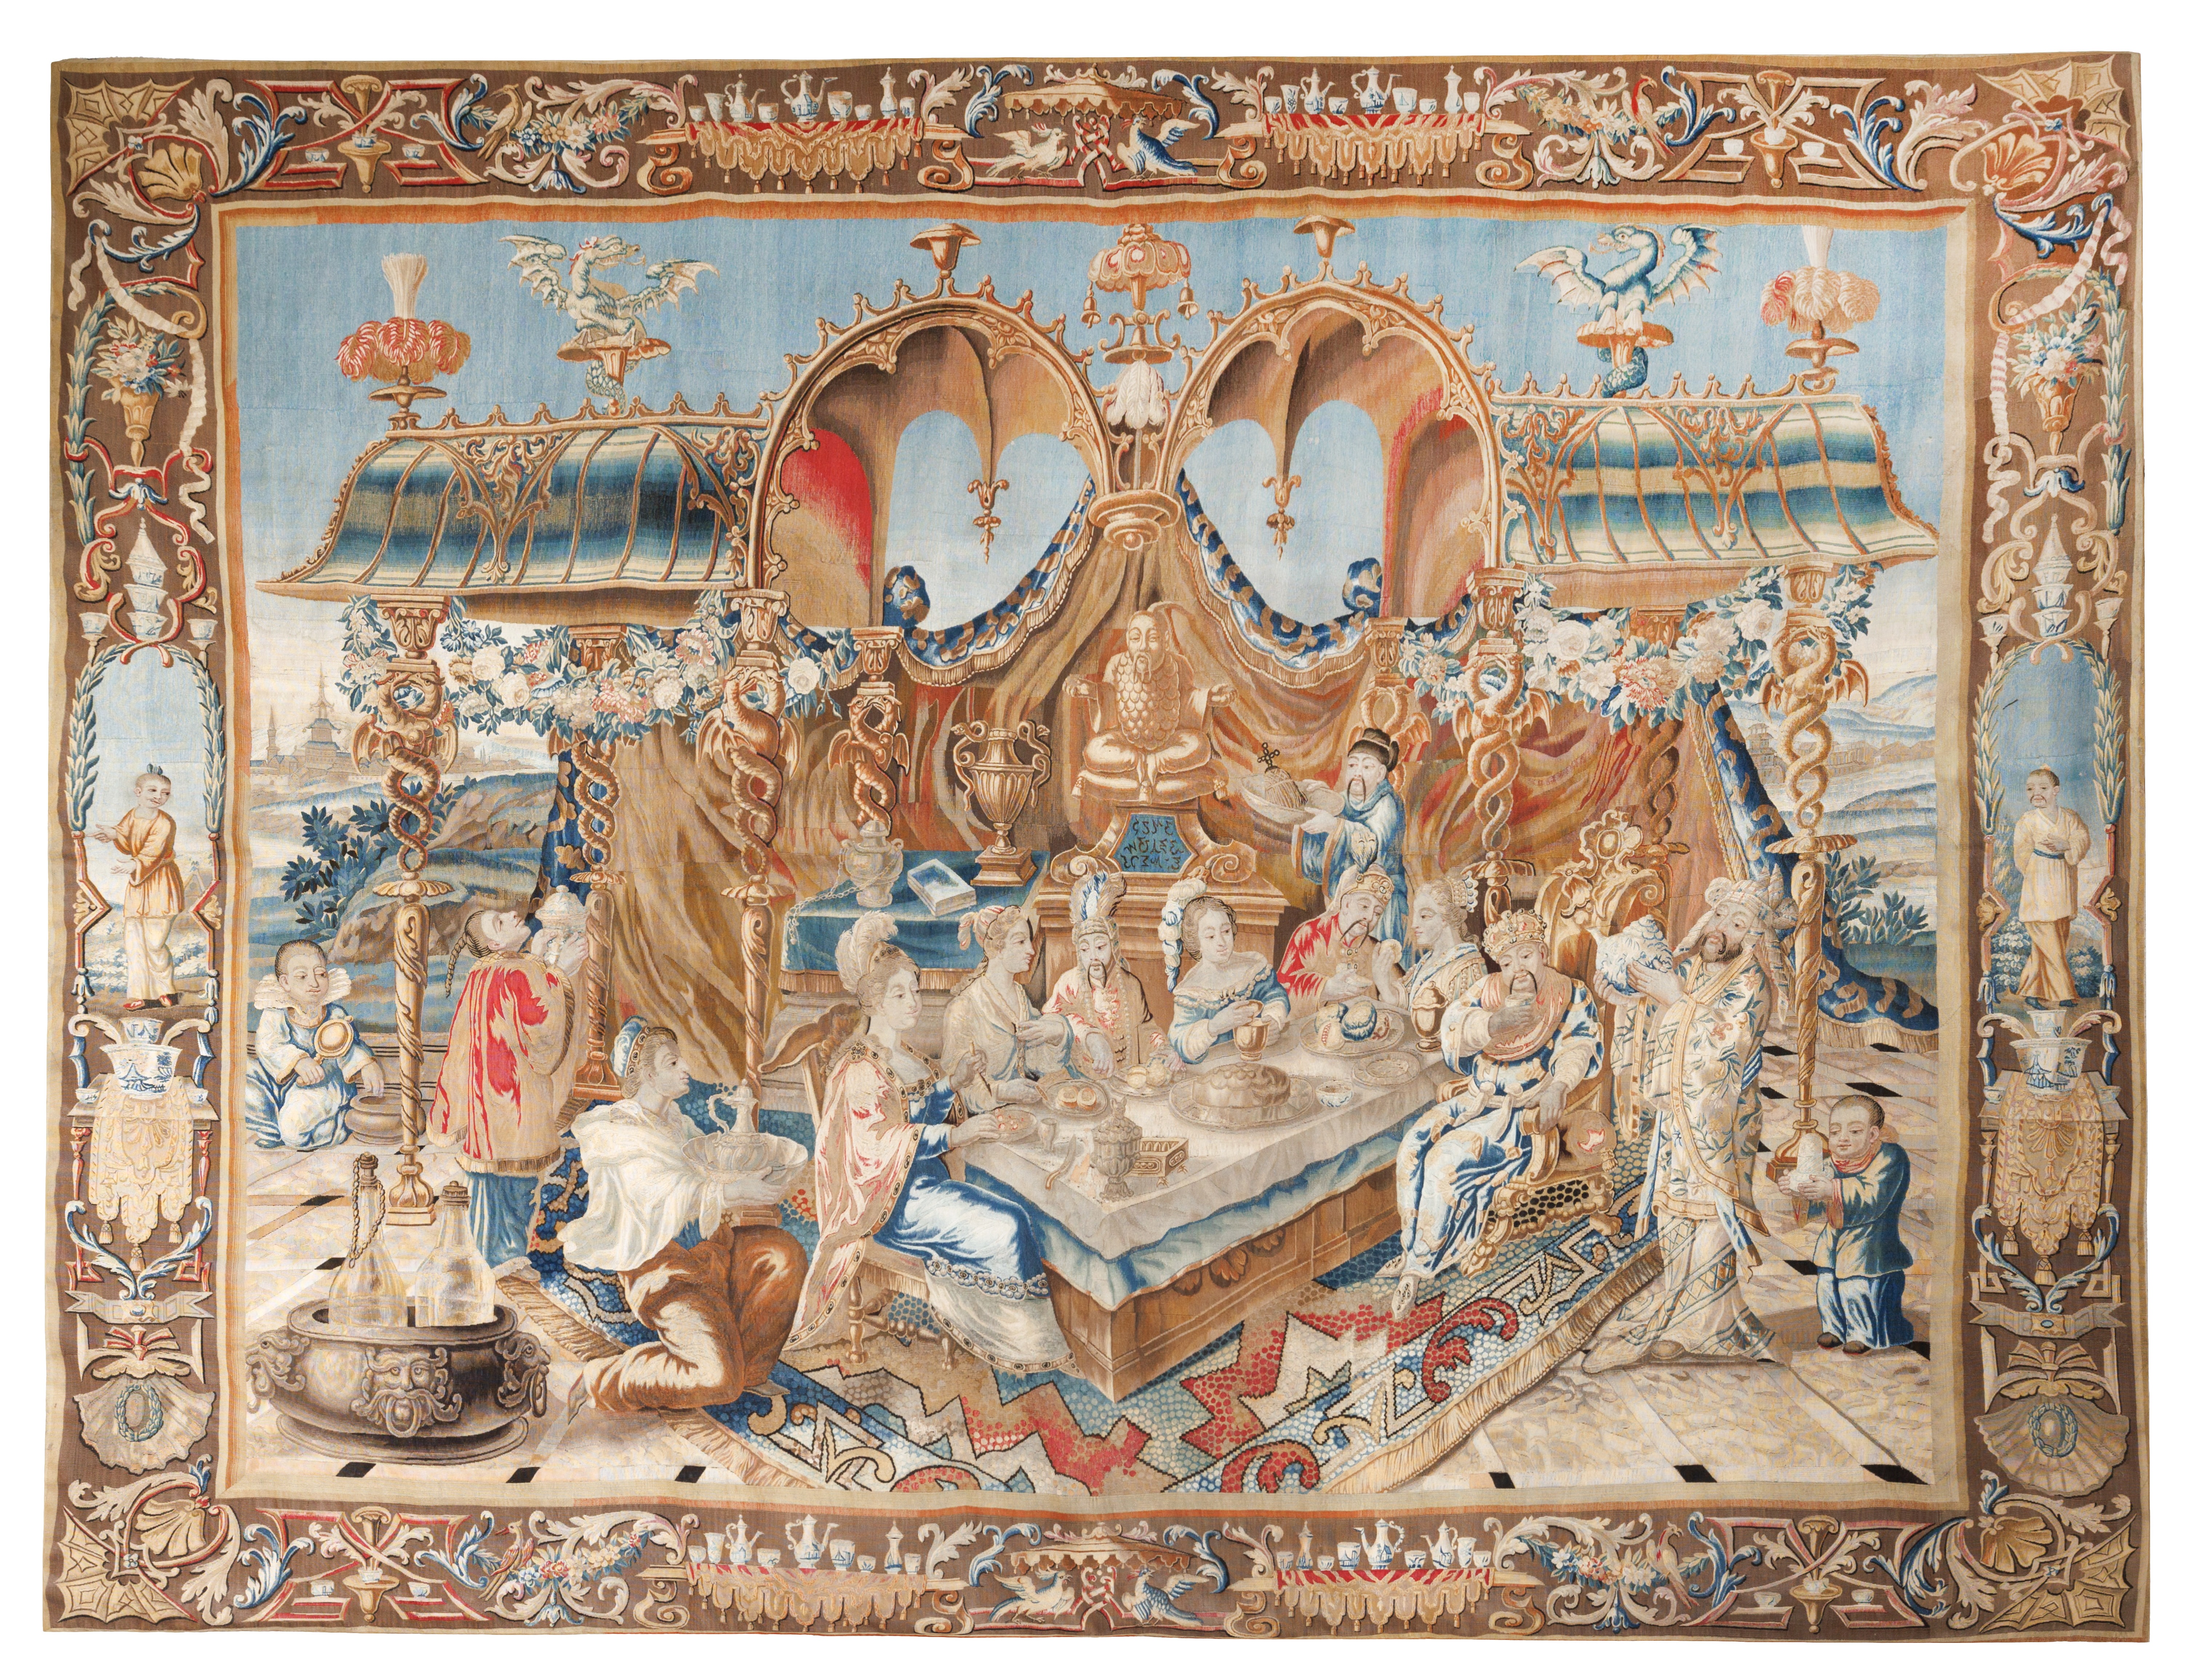 A fine and rare Berlin Chinoiserie tapestry of ‘The Emperor’s Banquet’ from the Grossmogulenfolge...